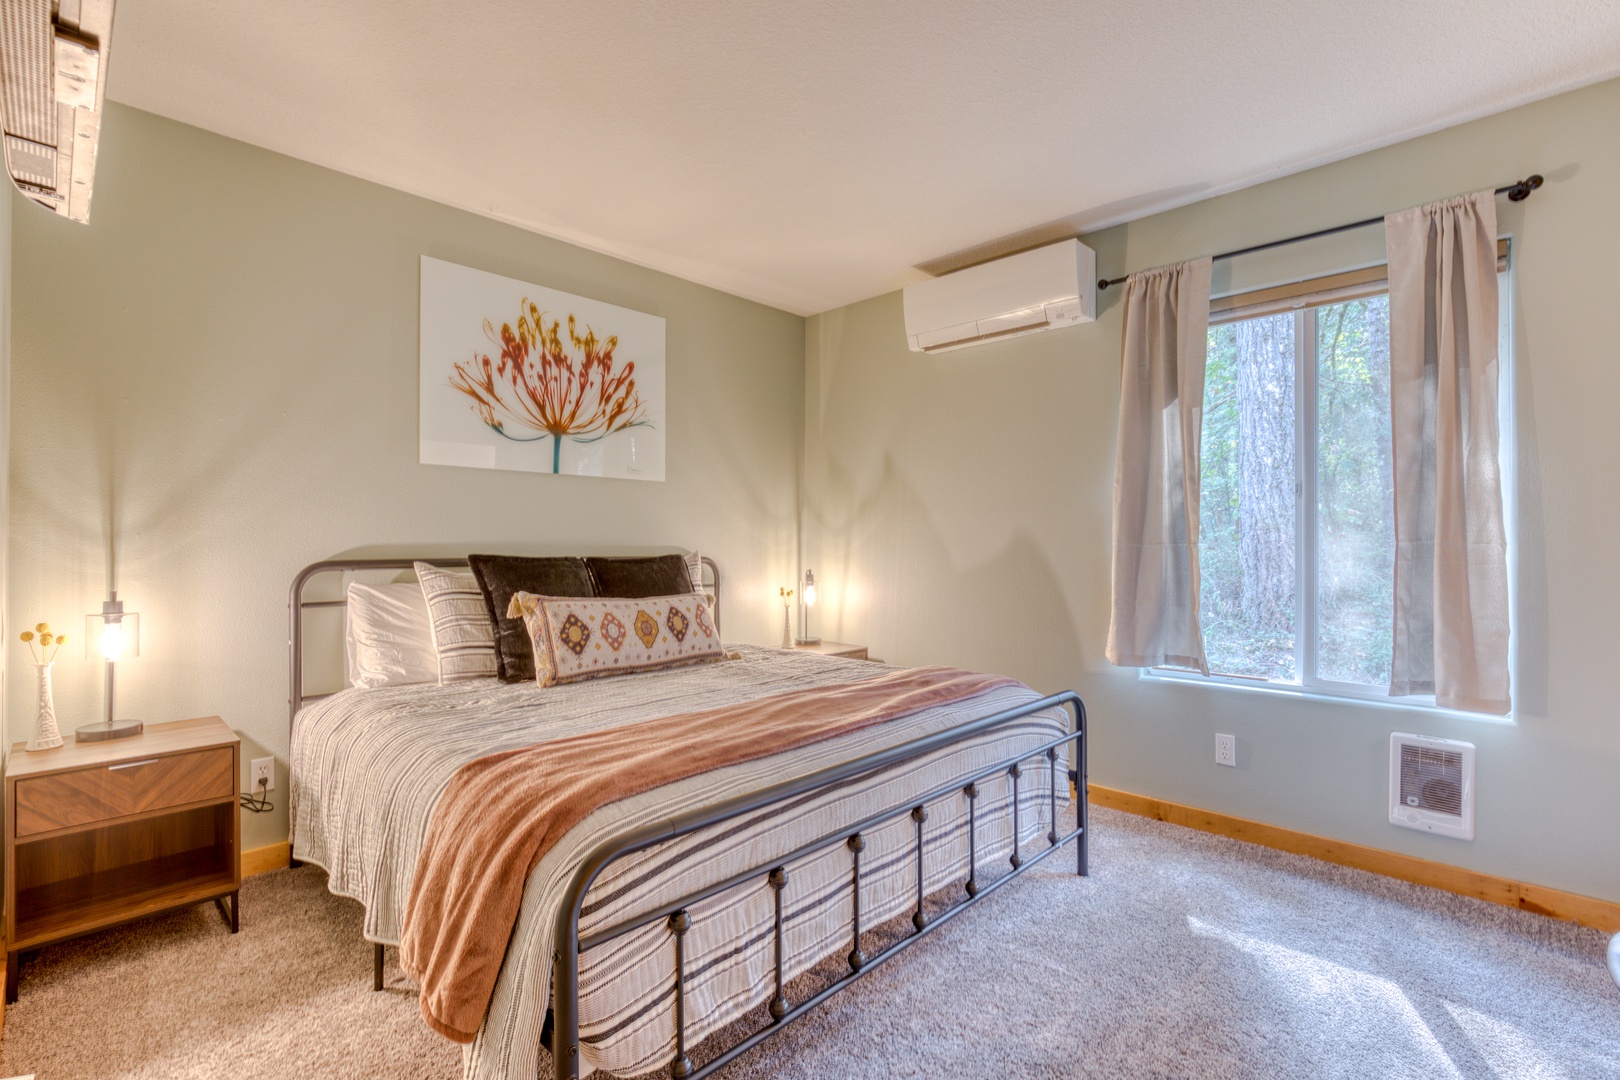 Brightwood Vacation Rentals, Riverside Retreat - The Primary Bedroom will be on your right down the hallway